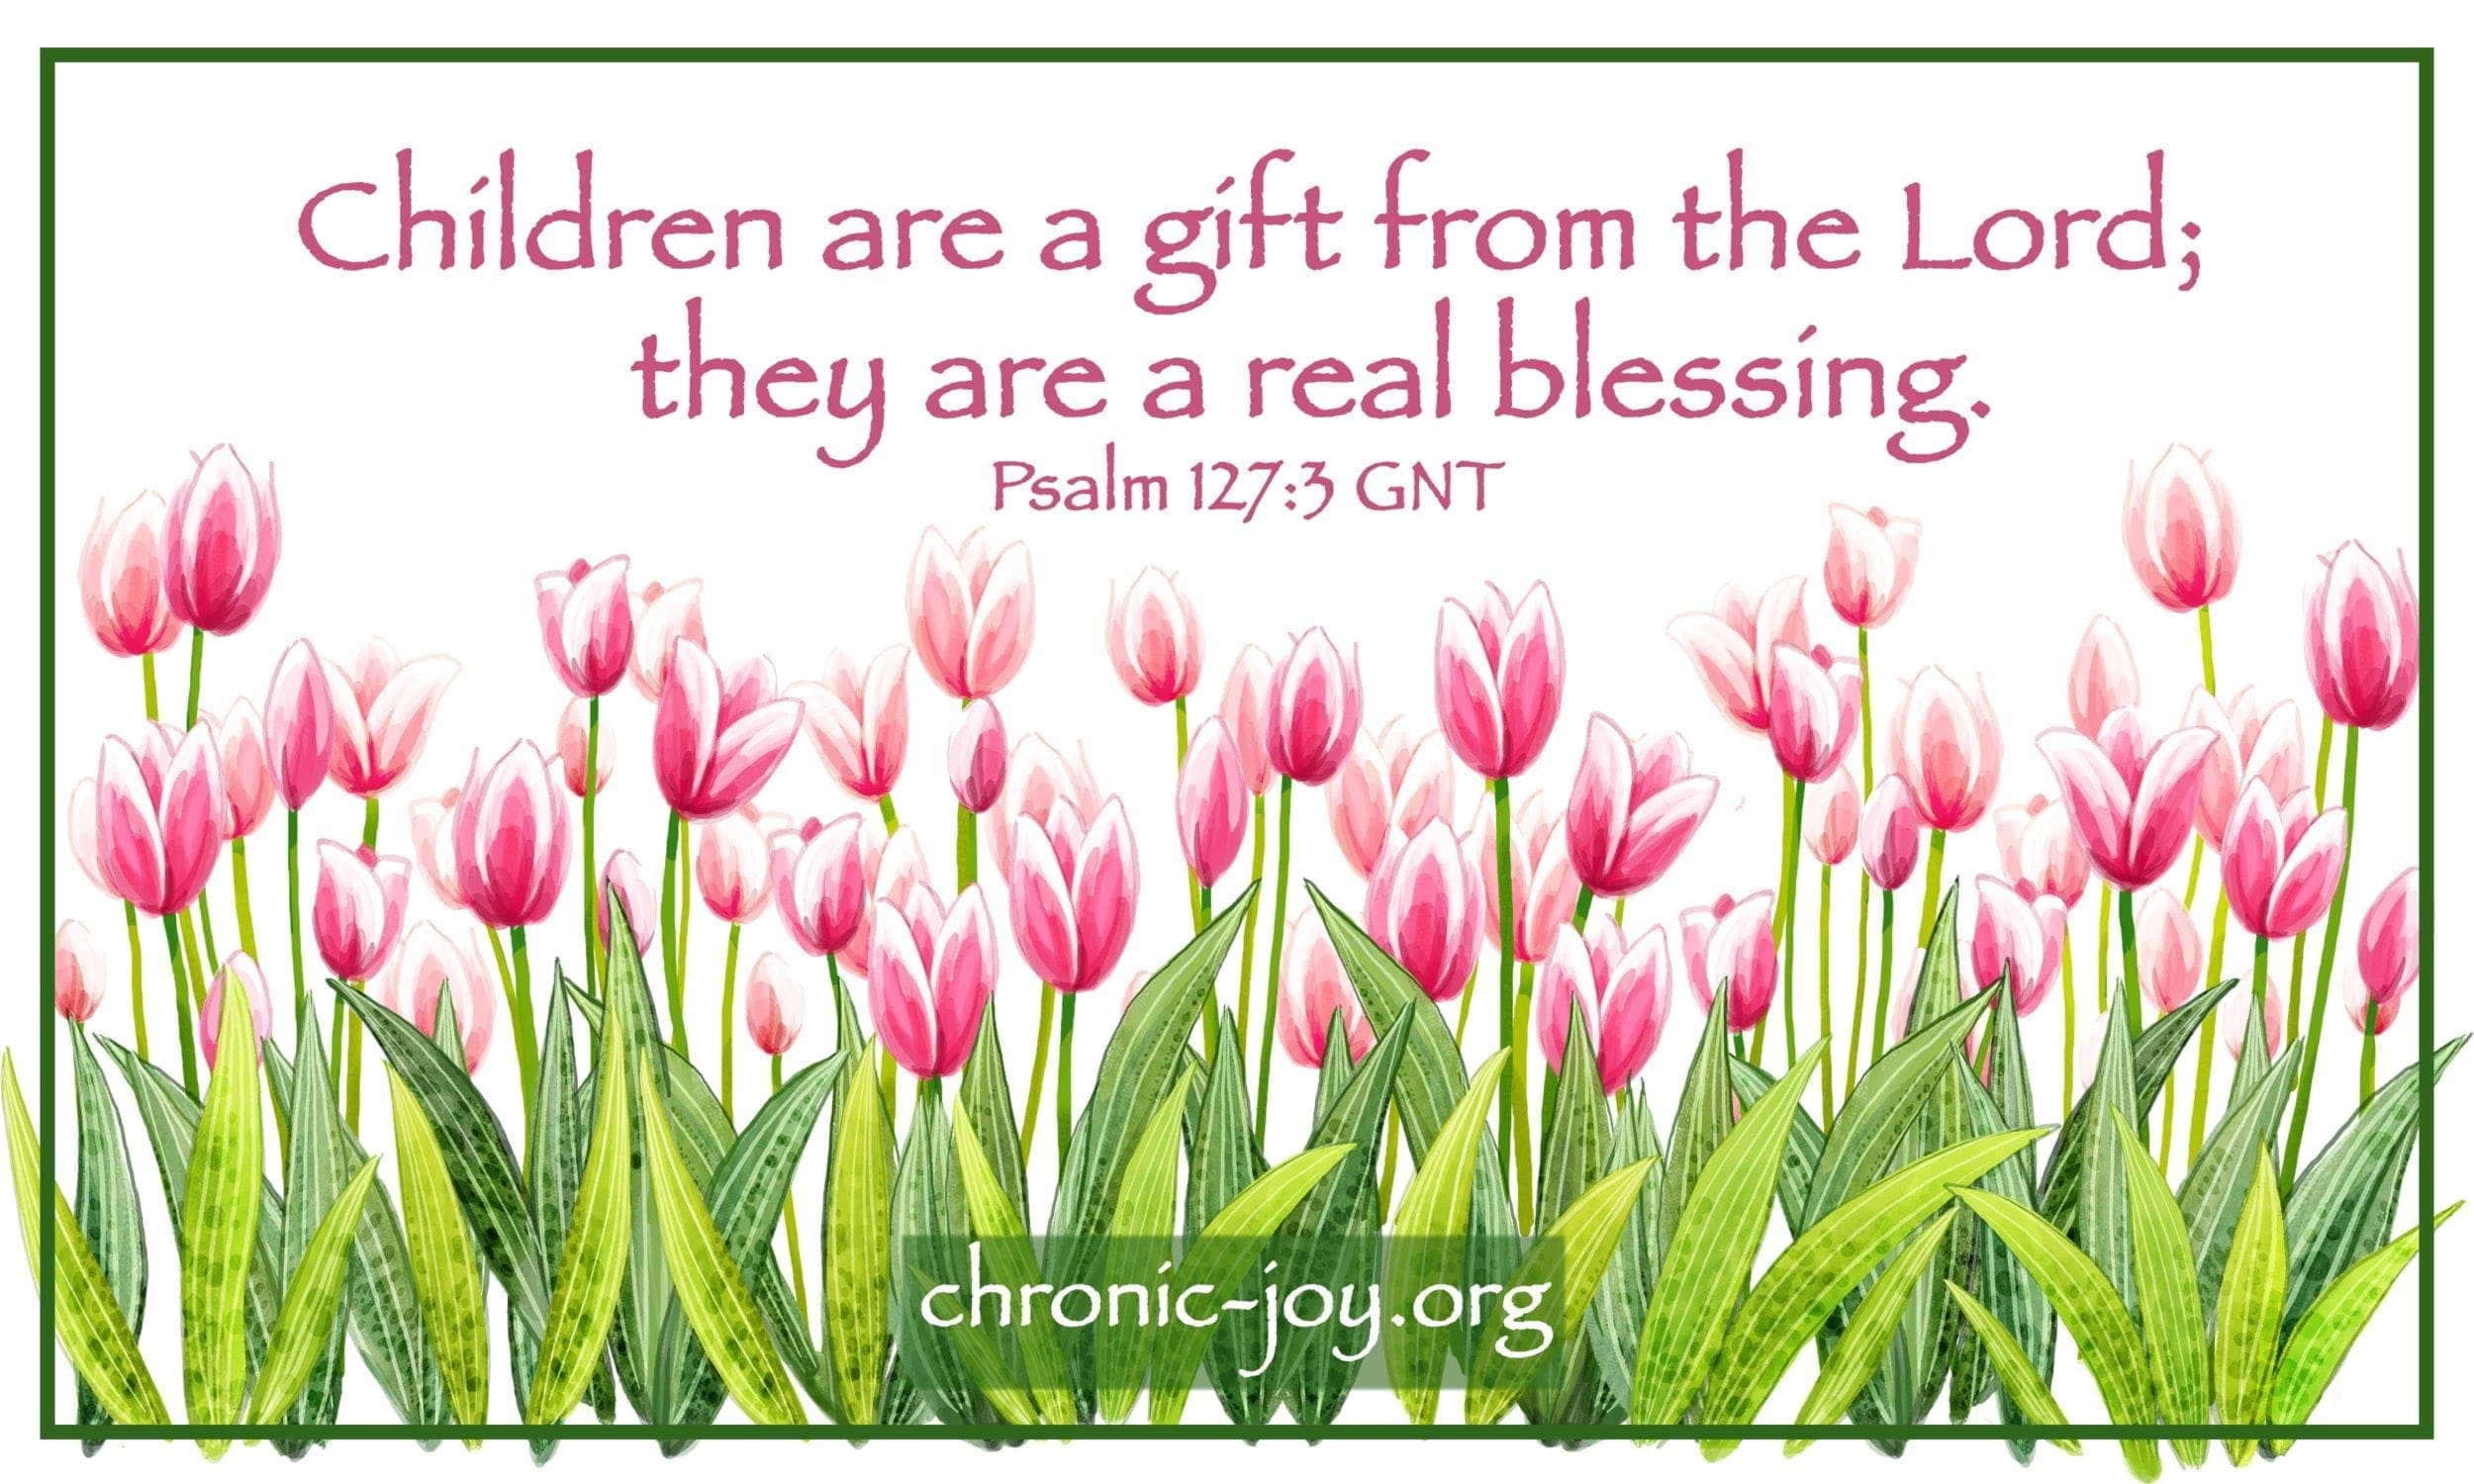 Children are a gift from God.